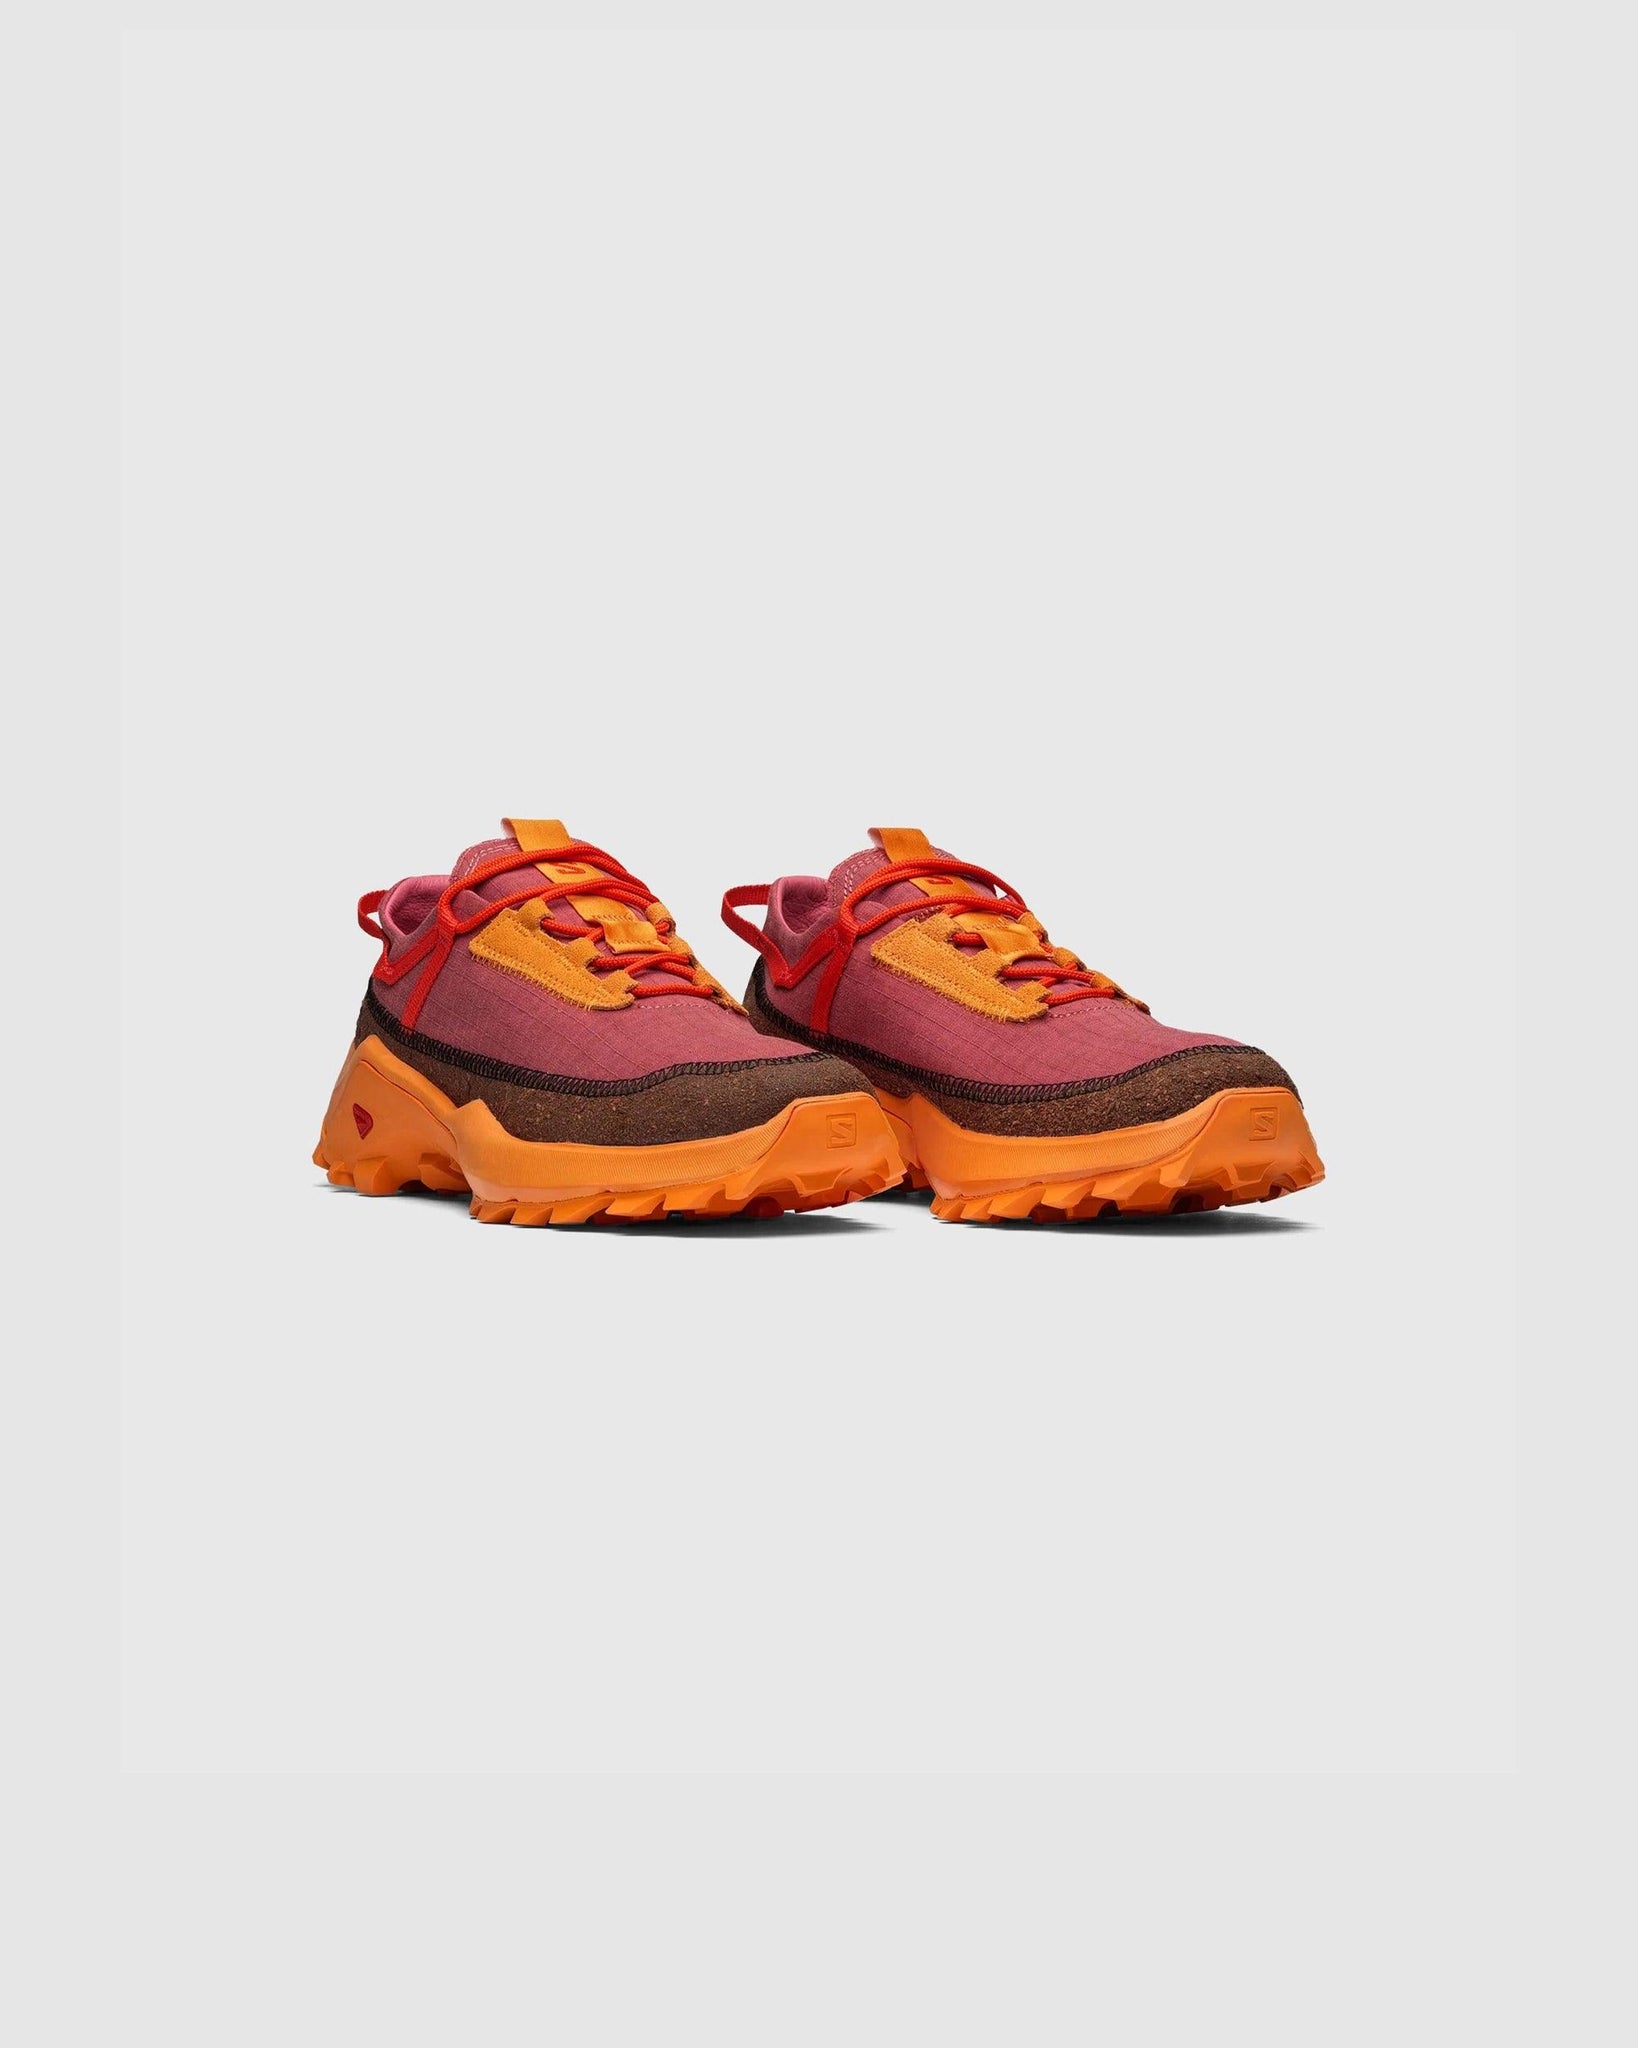 Salomon Cross Pro Better For Ranra Turmeric/Blazing orange/Scarlet Ibis - {{ collection.title }} - Chinatown Country Club 